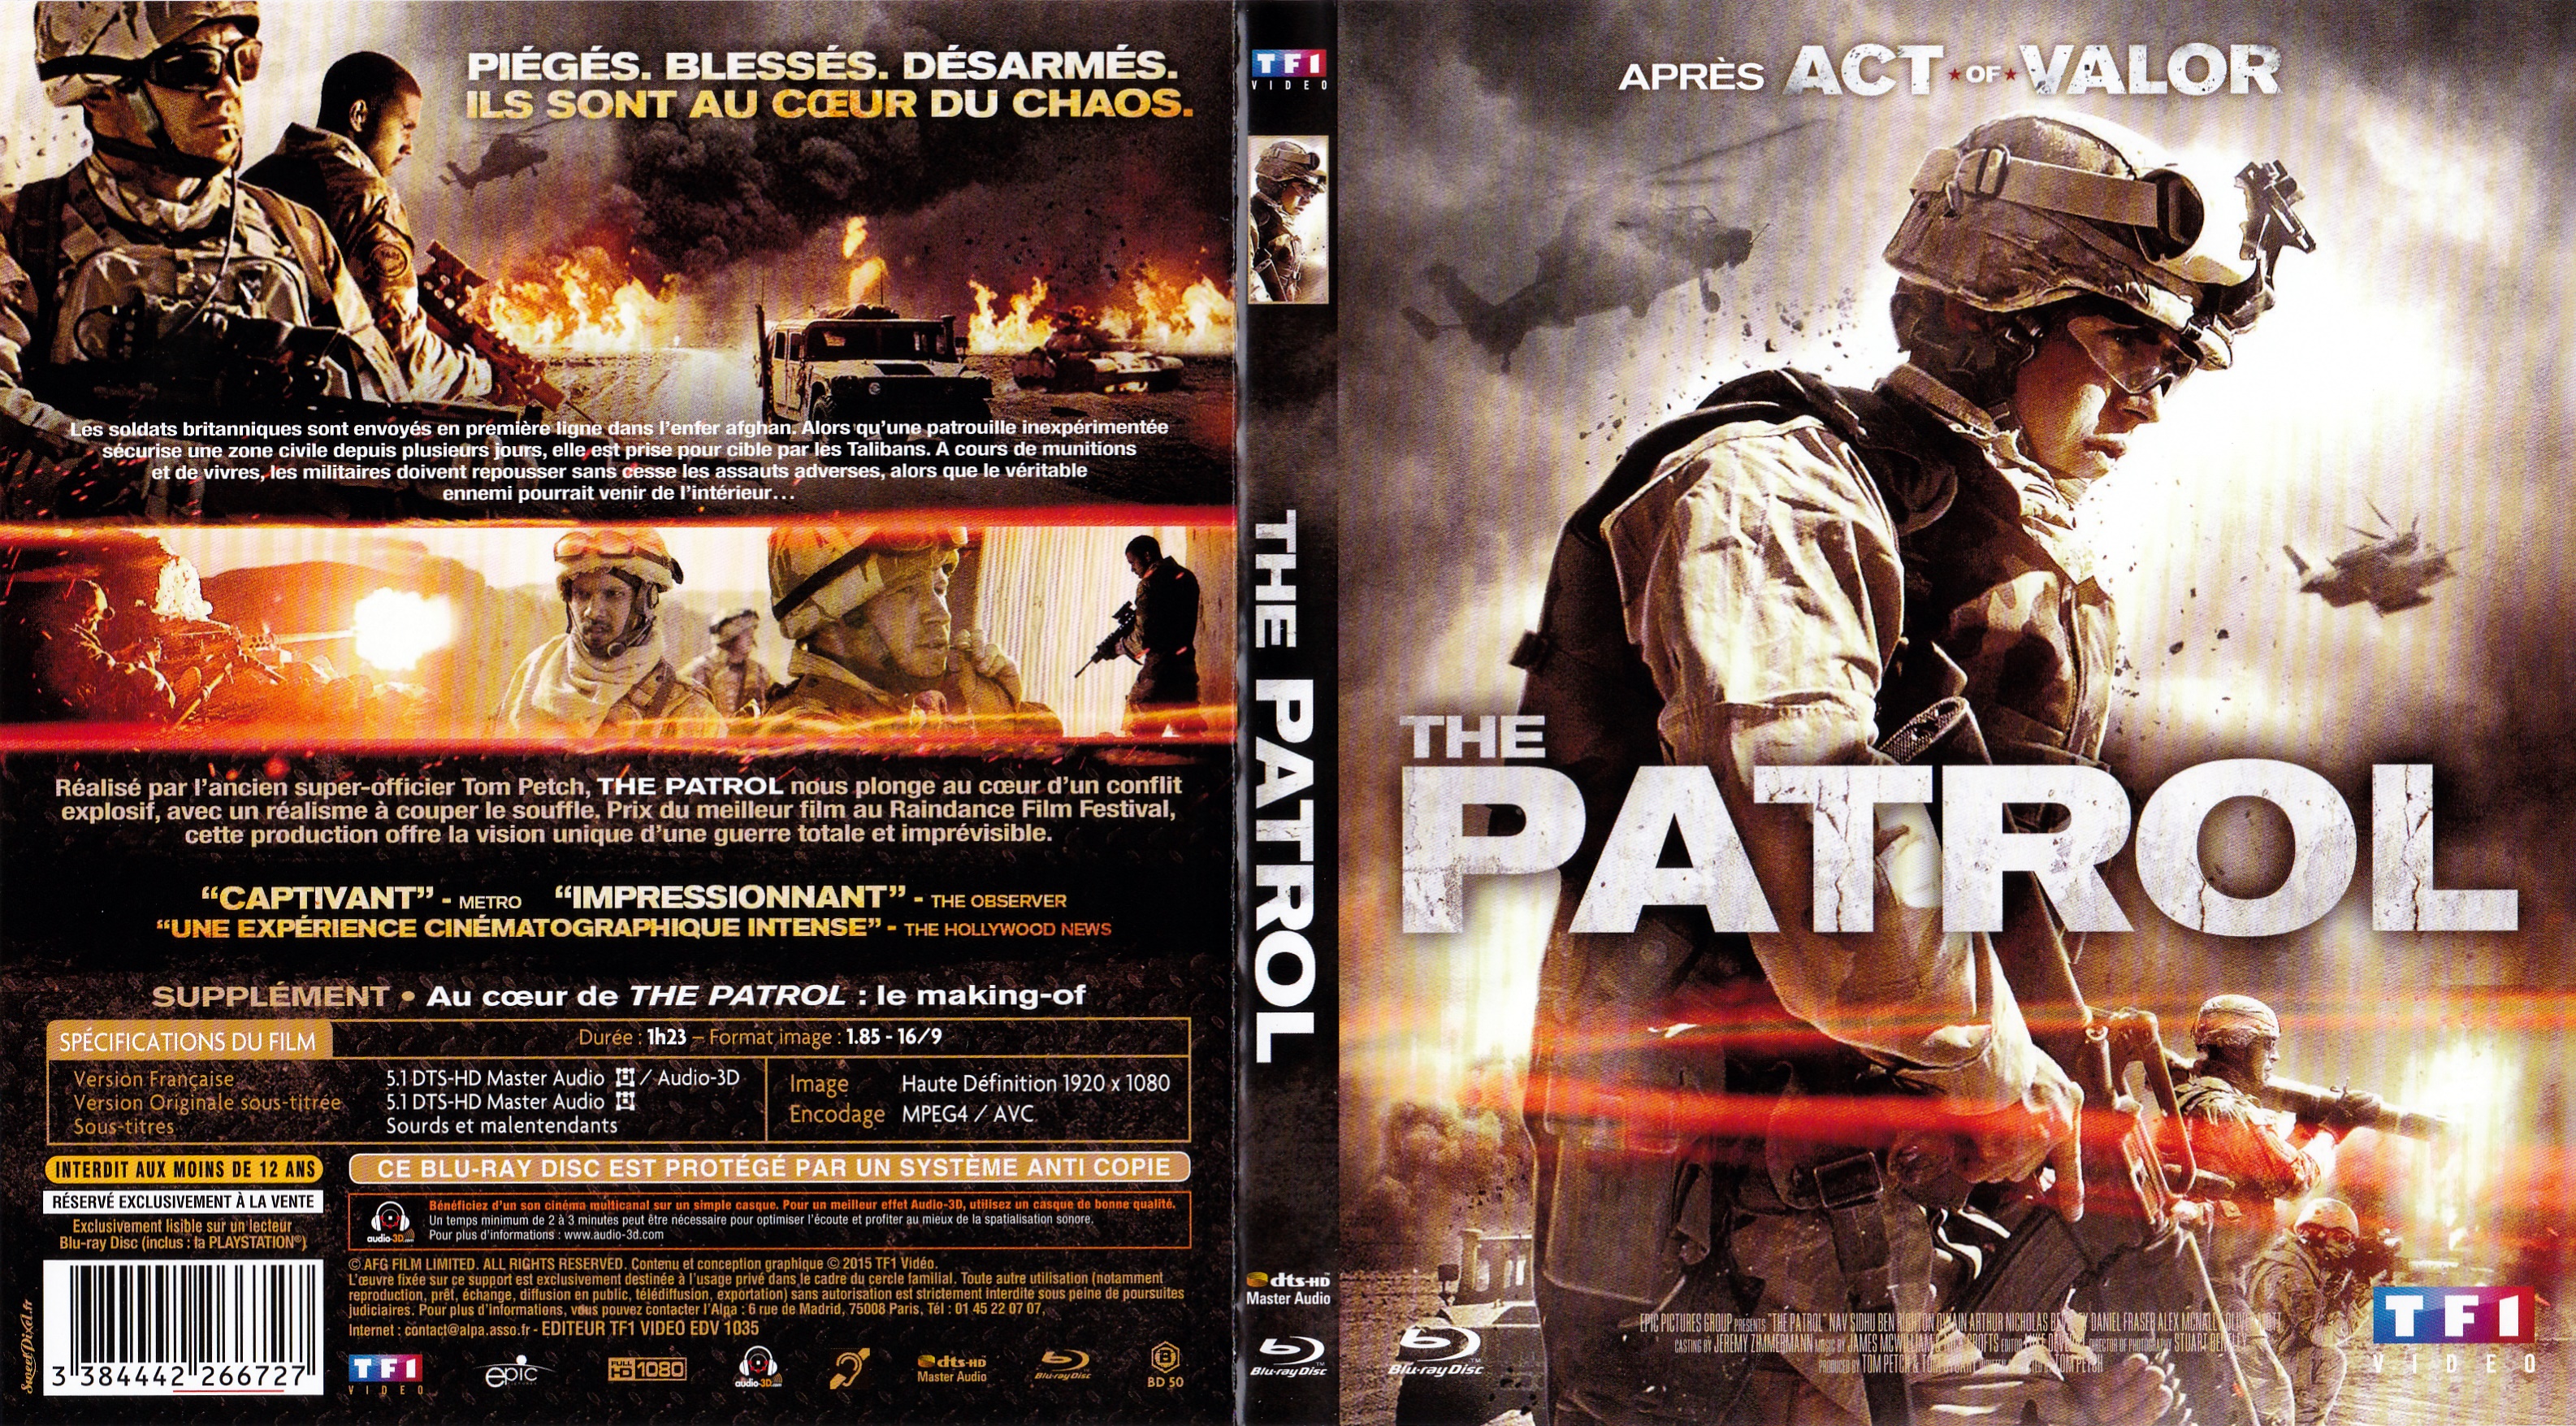 Jaquette DVD The patrol (BLU-RAY)